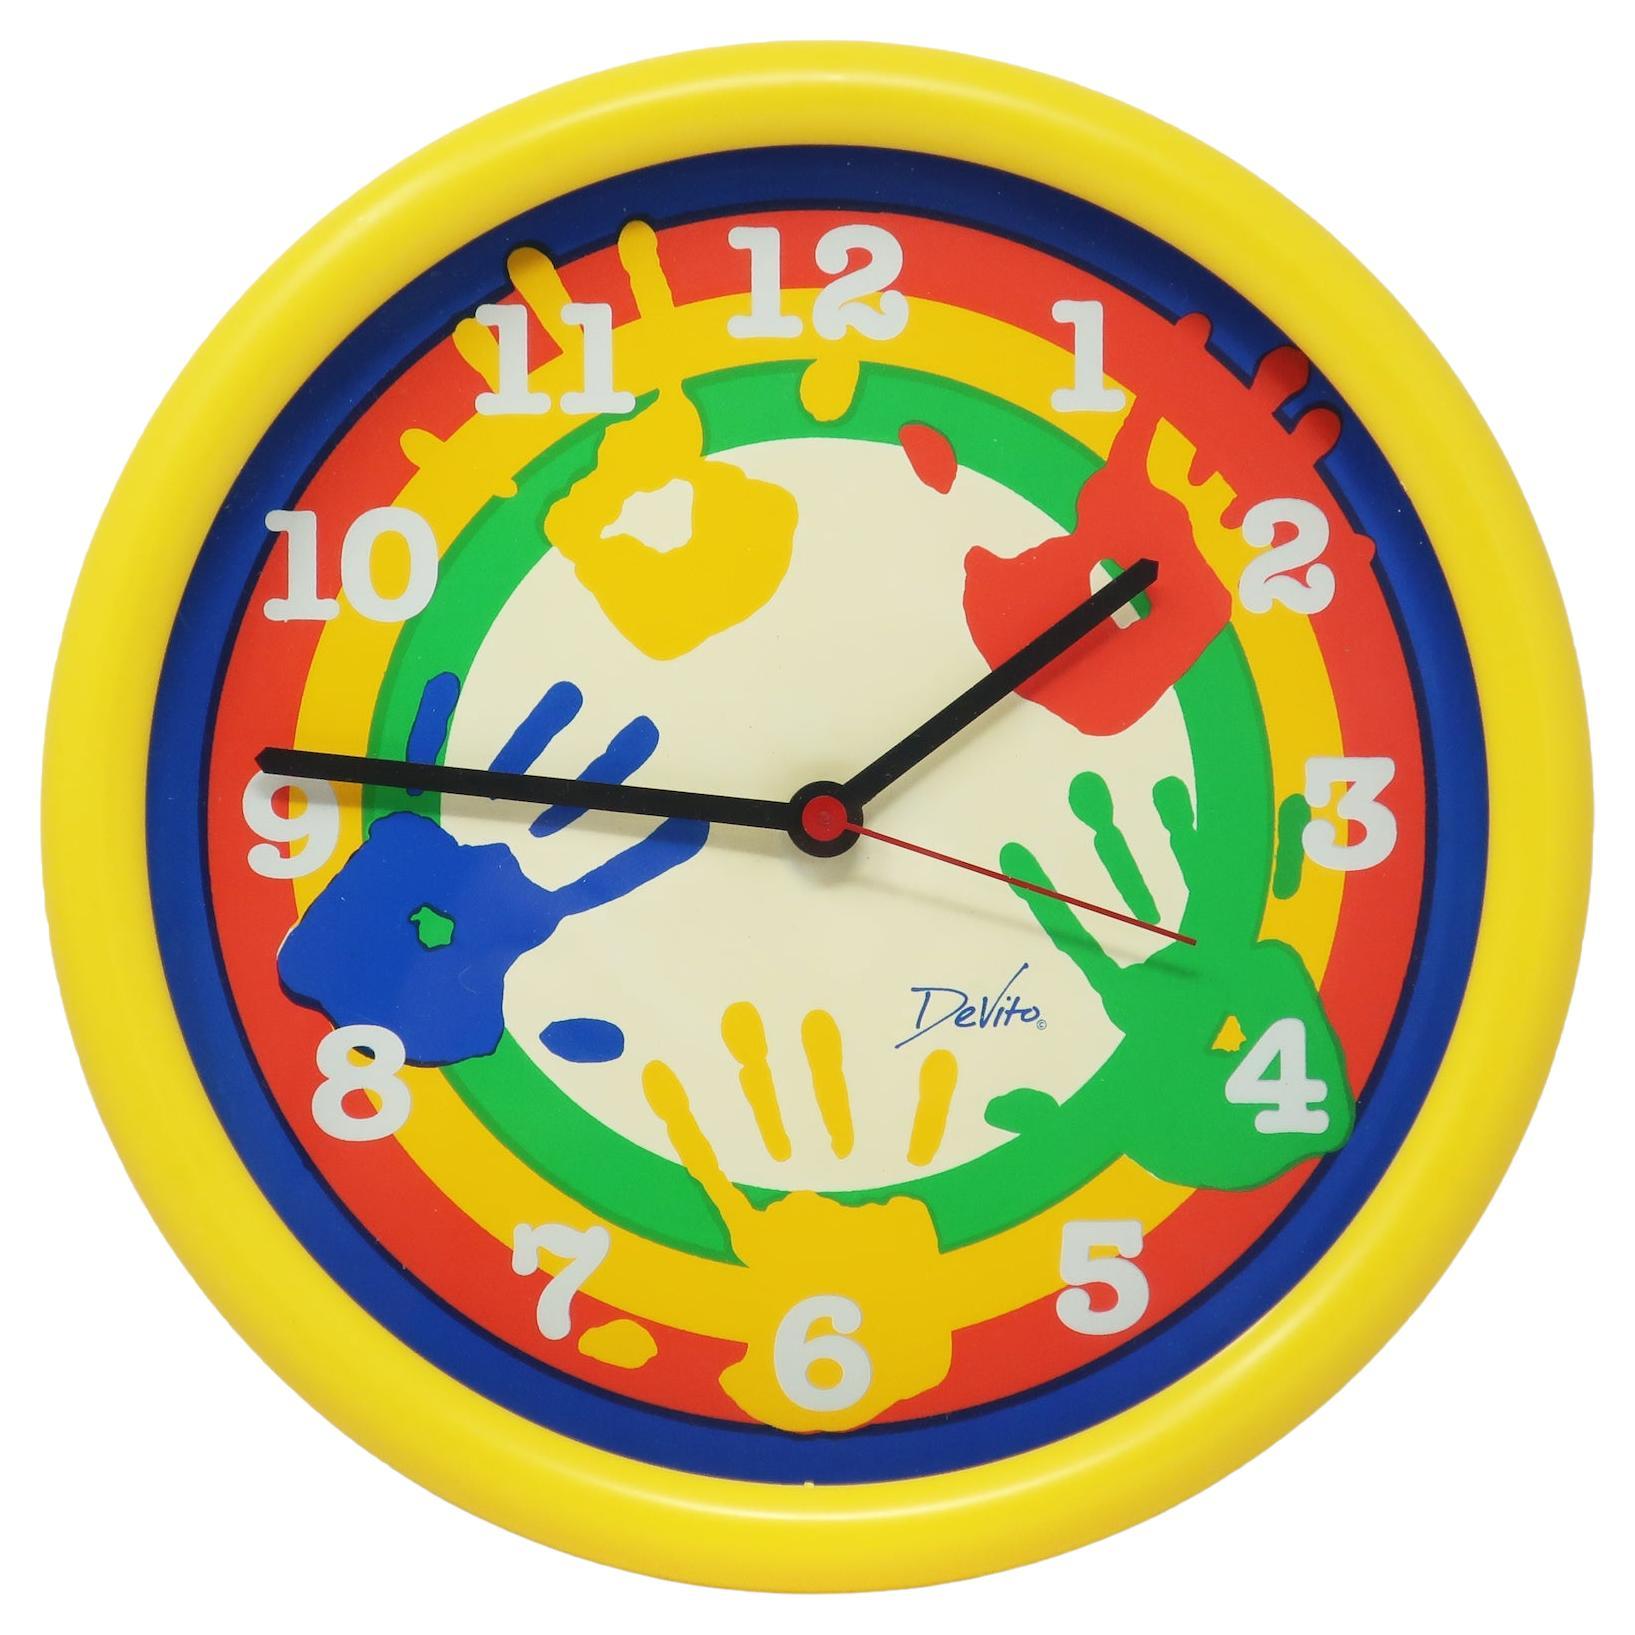 1980s Colorful Handprint Wall Clock by Devito For Sale